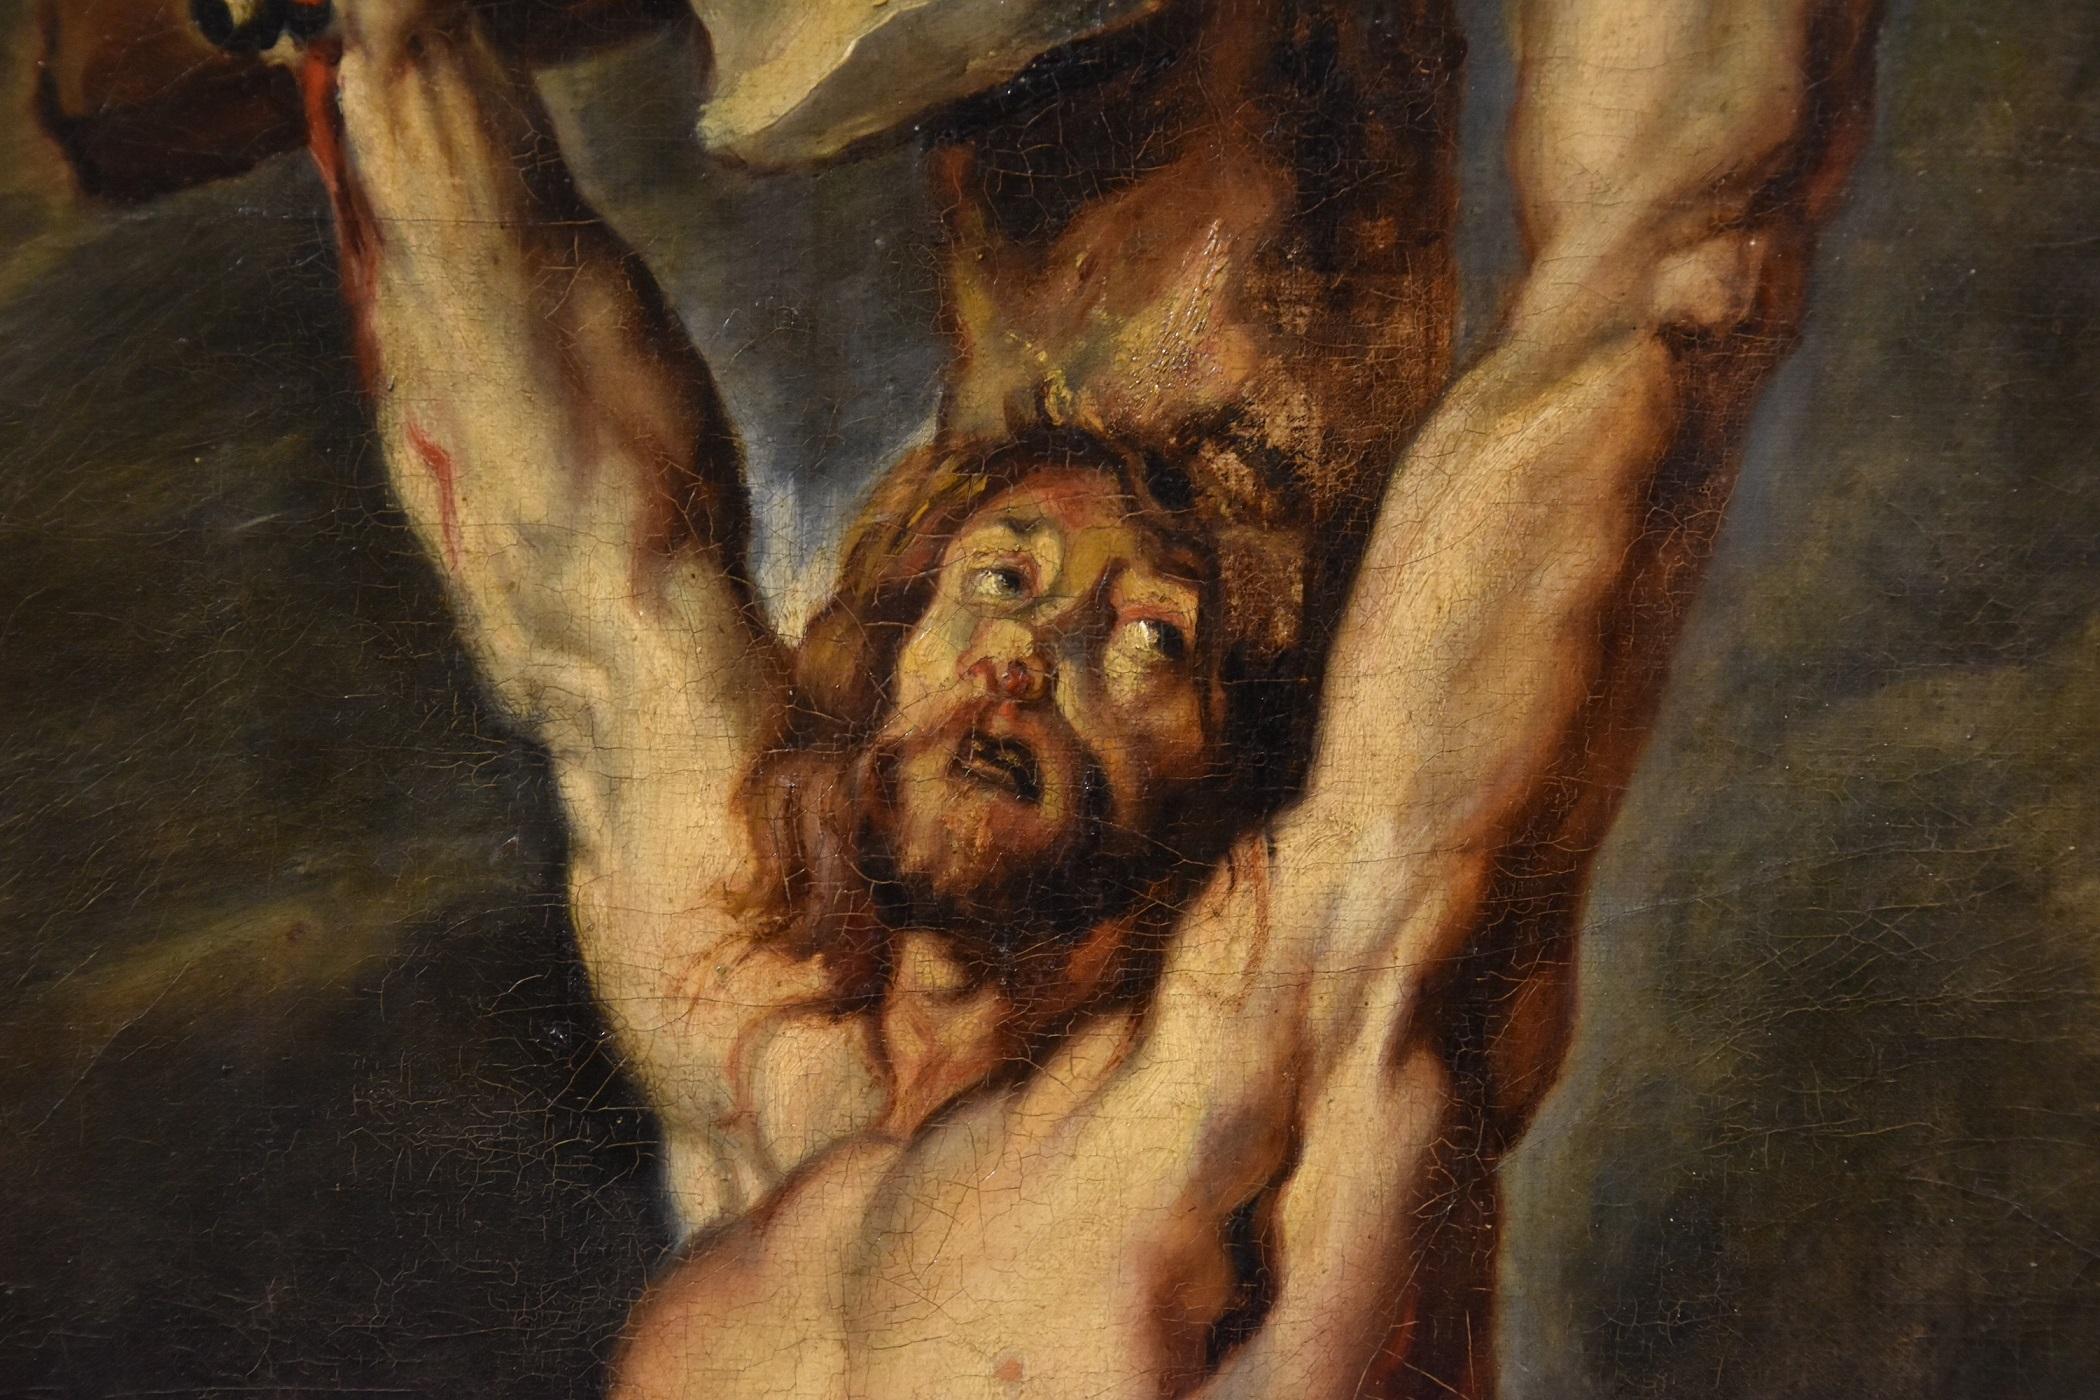 Christ Crucified Rubens Paint Oil on canvas Old master 17th Century Religious 2